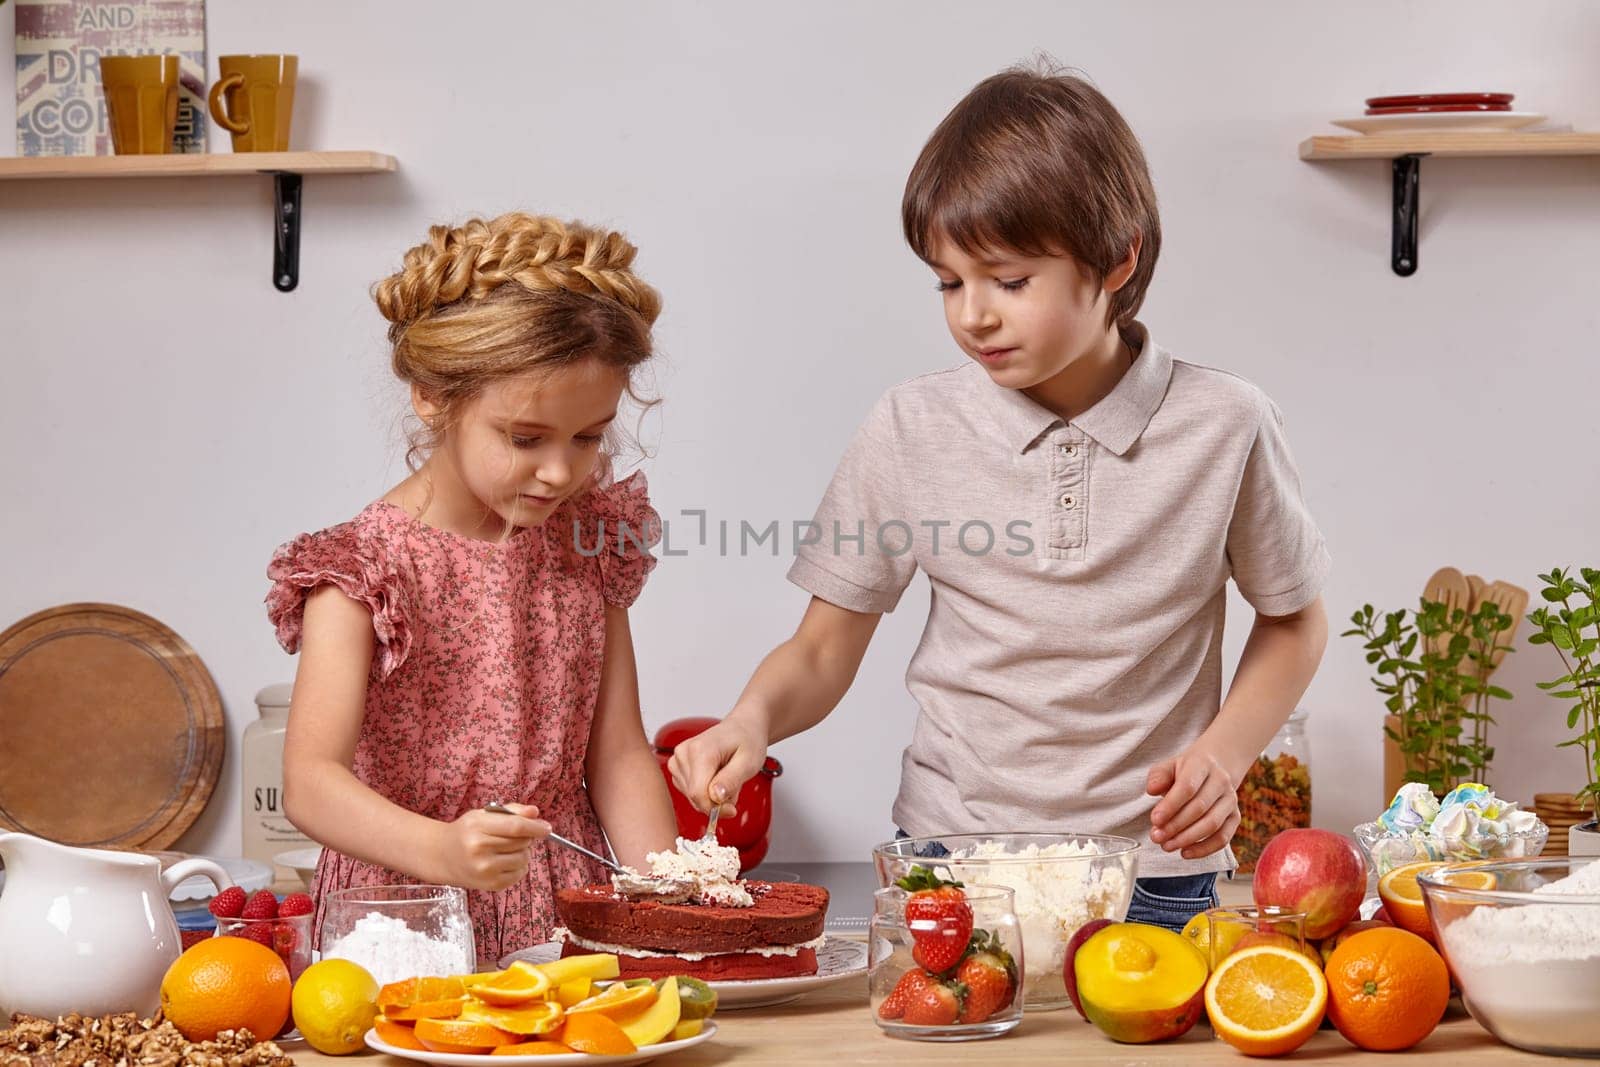 Brunette boy dressed in a light t-shirt and jeans and a cute girl with a braid in her hair, wearing in a pink dress are making a cake at a kitchen, against a white wall with shelves on it. They are spreading some cottage cheese on a cake layer.